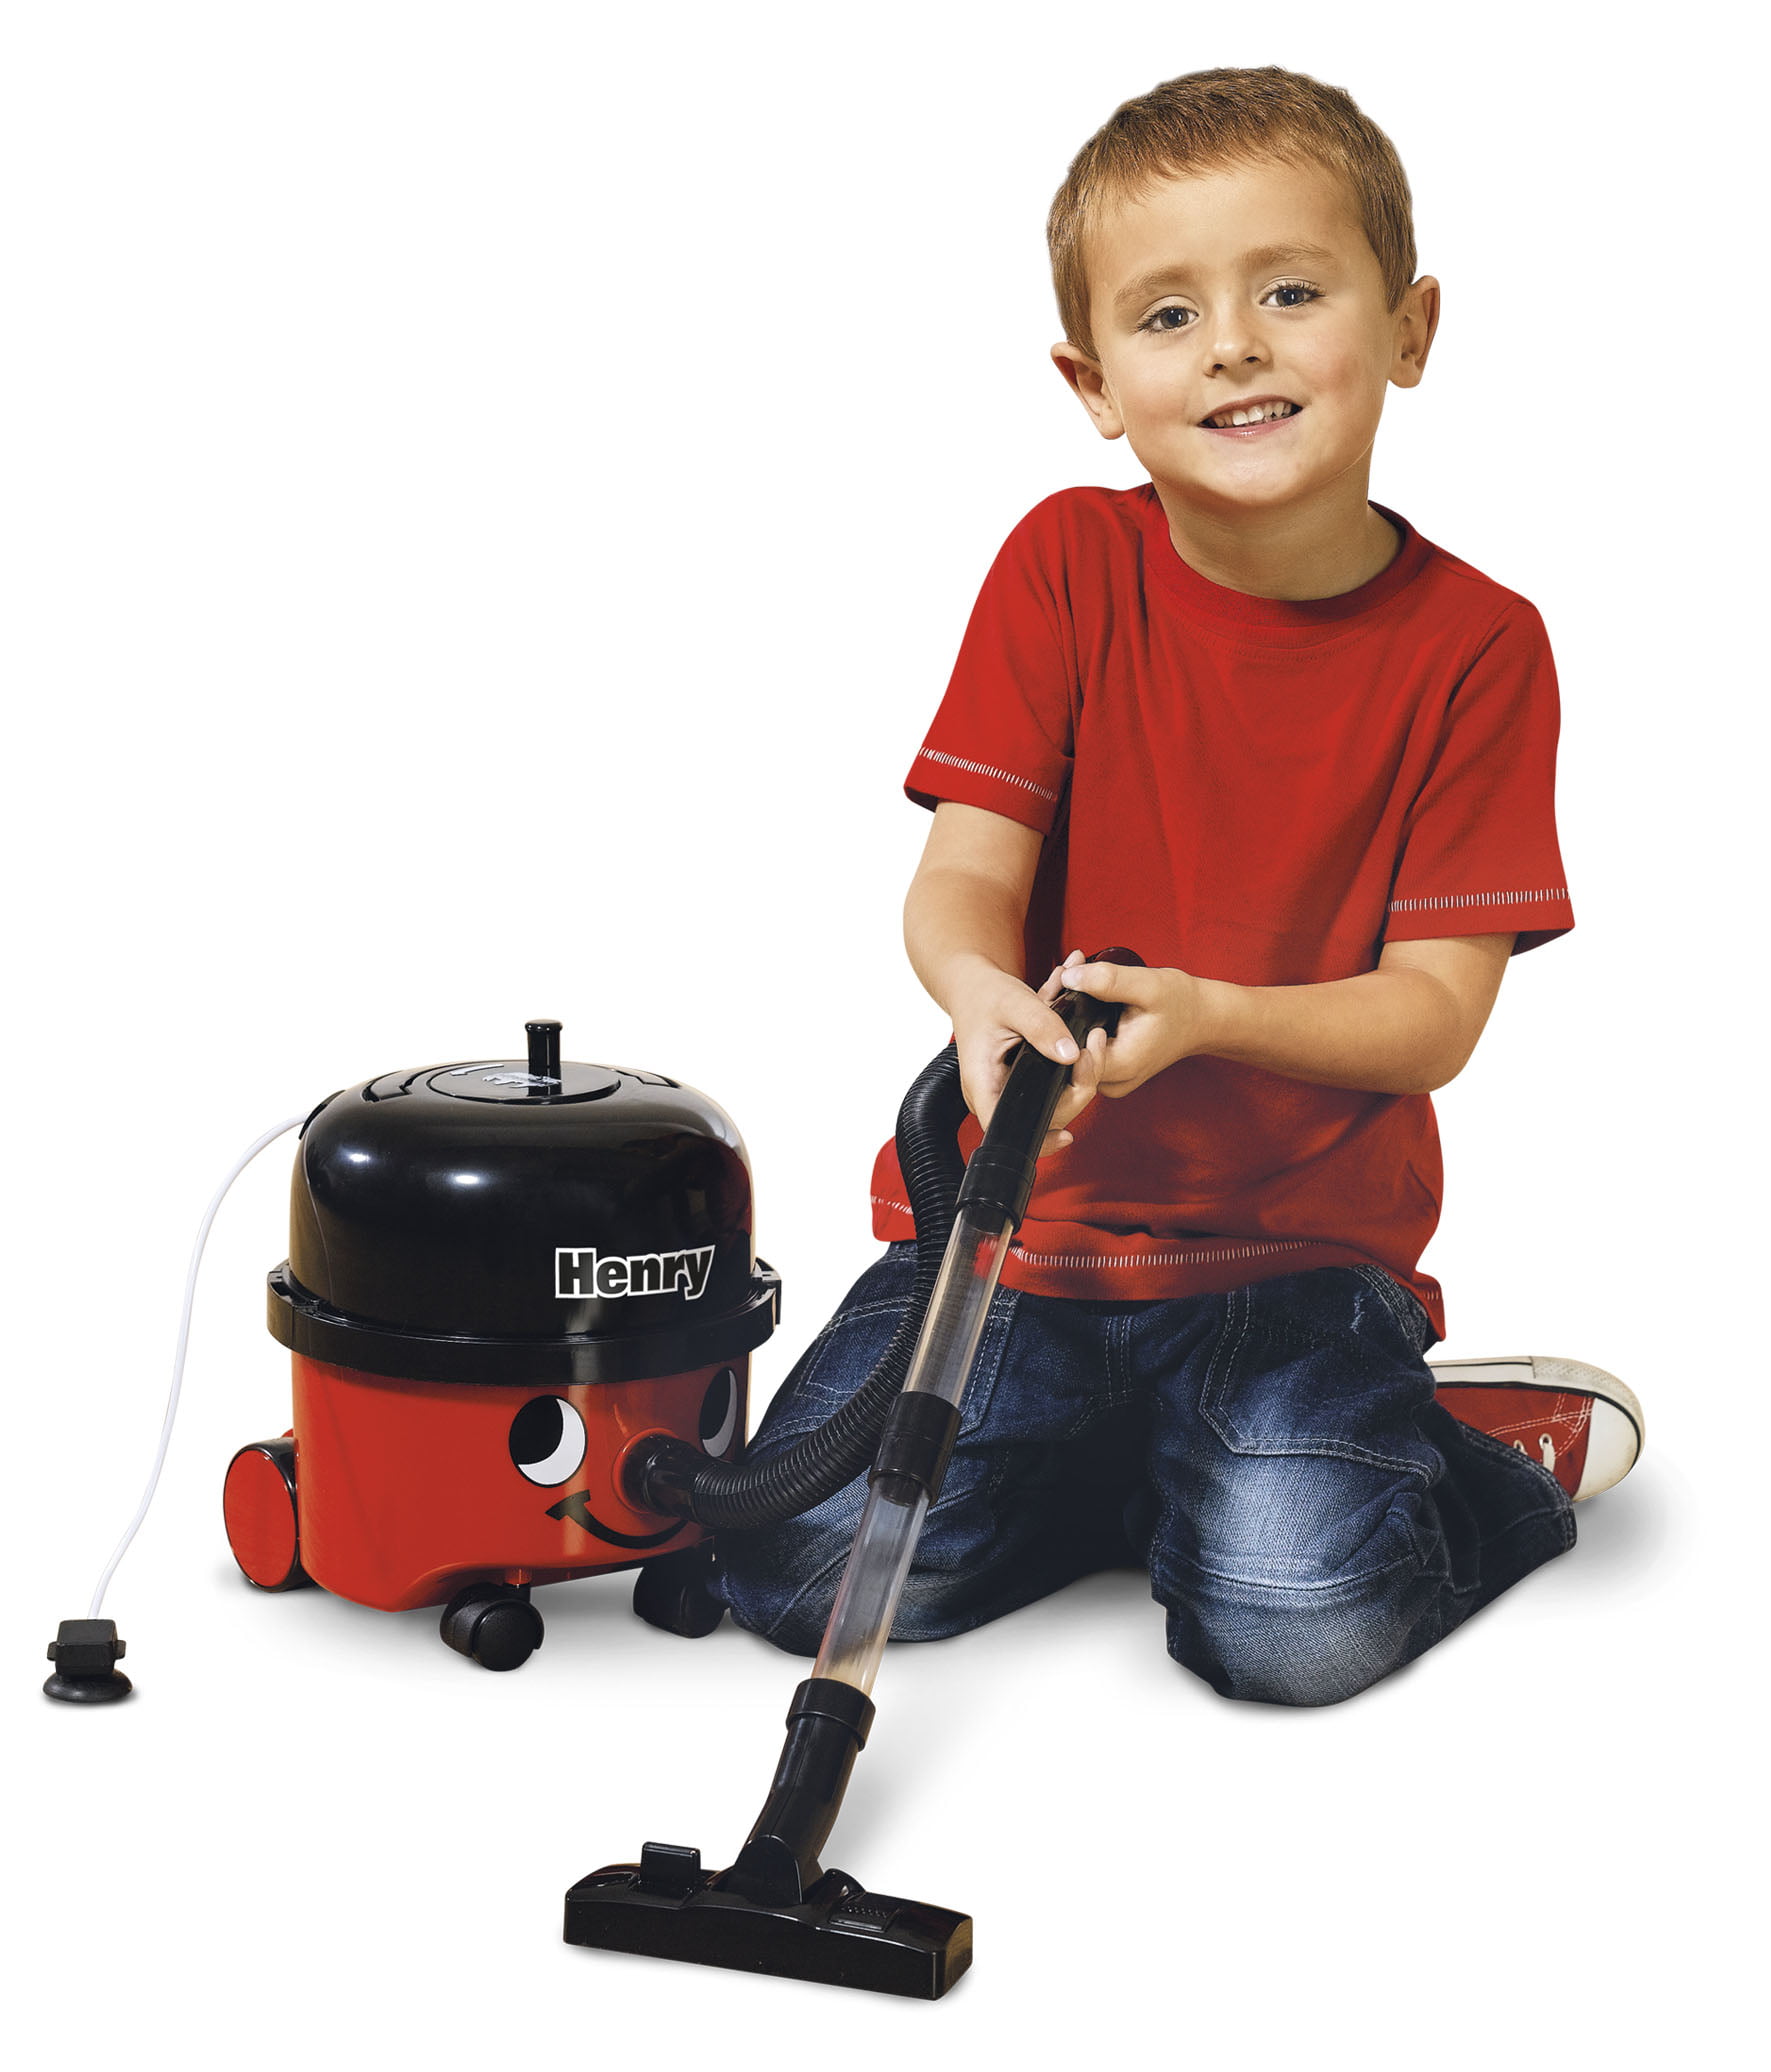 BN Casdon HENRY VACUUM CLEANER Child's Toy Hoover Pretend Play Role Play 3 yrs 